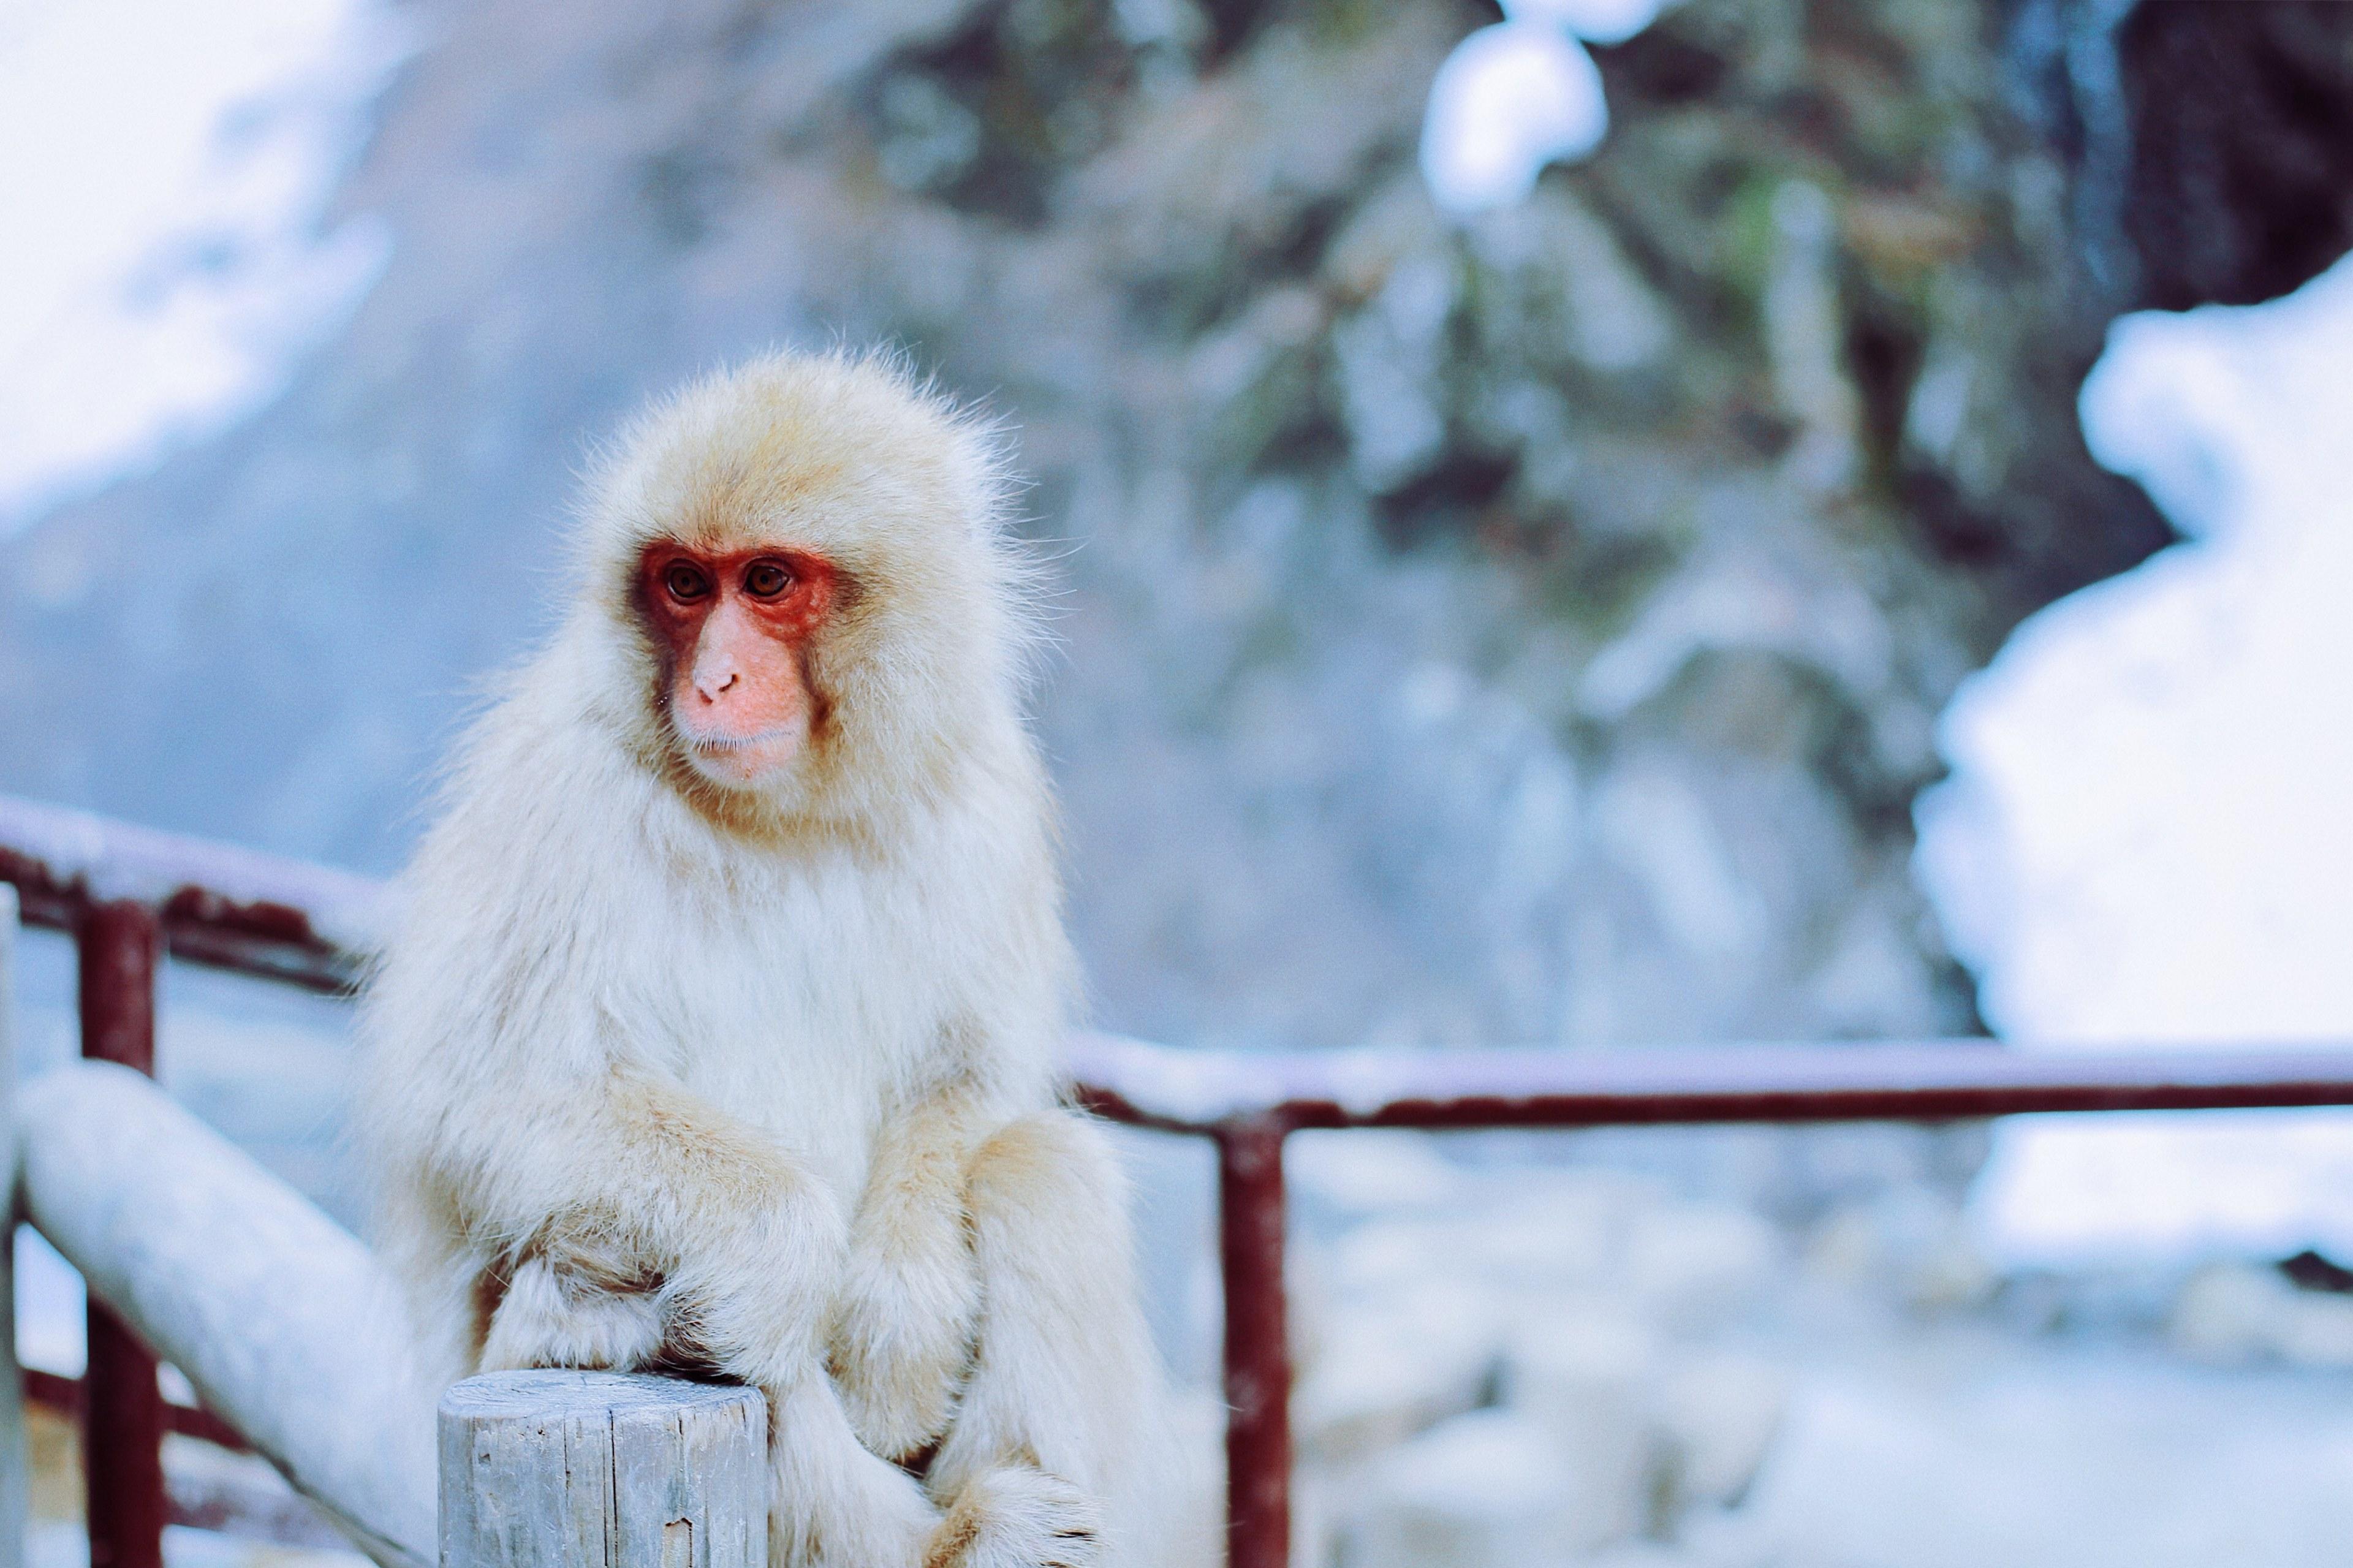 Wallpaper ID 276578 monkey with white hair and red face